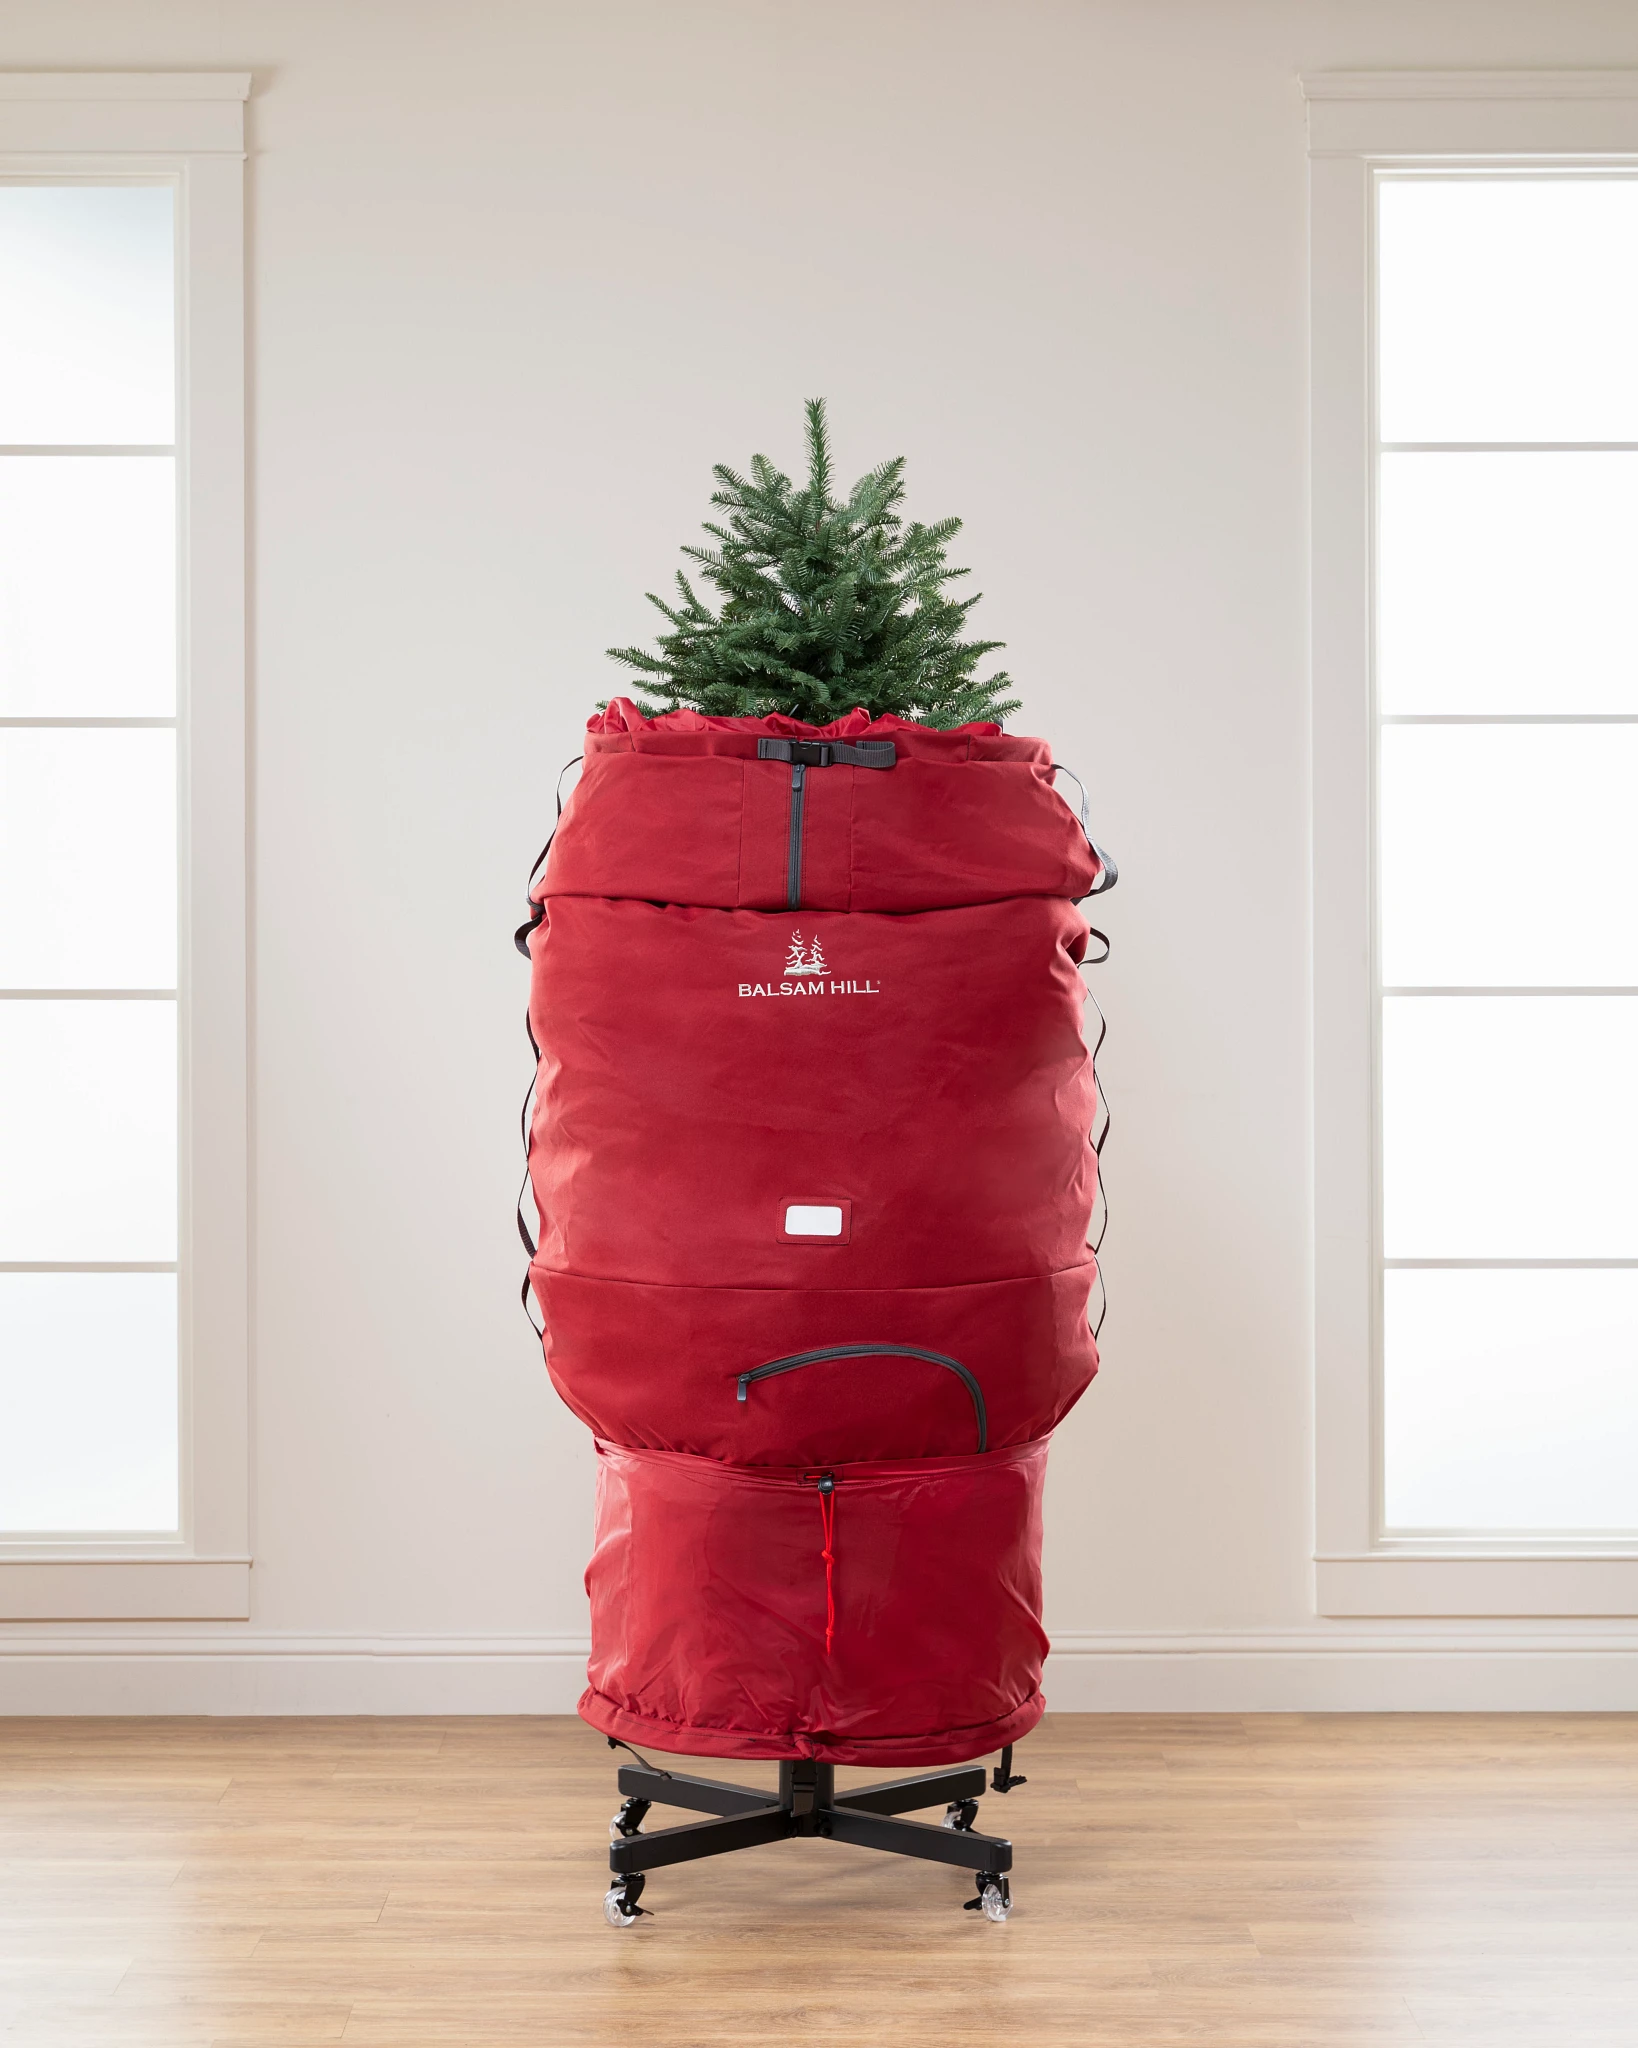 TreeKeeper GreensKeeper Rolling Christmas Tree Storage Bag for Trees Up to  15 ft. Tall TK-10773-RS - The Home Depot